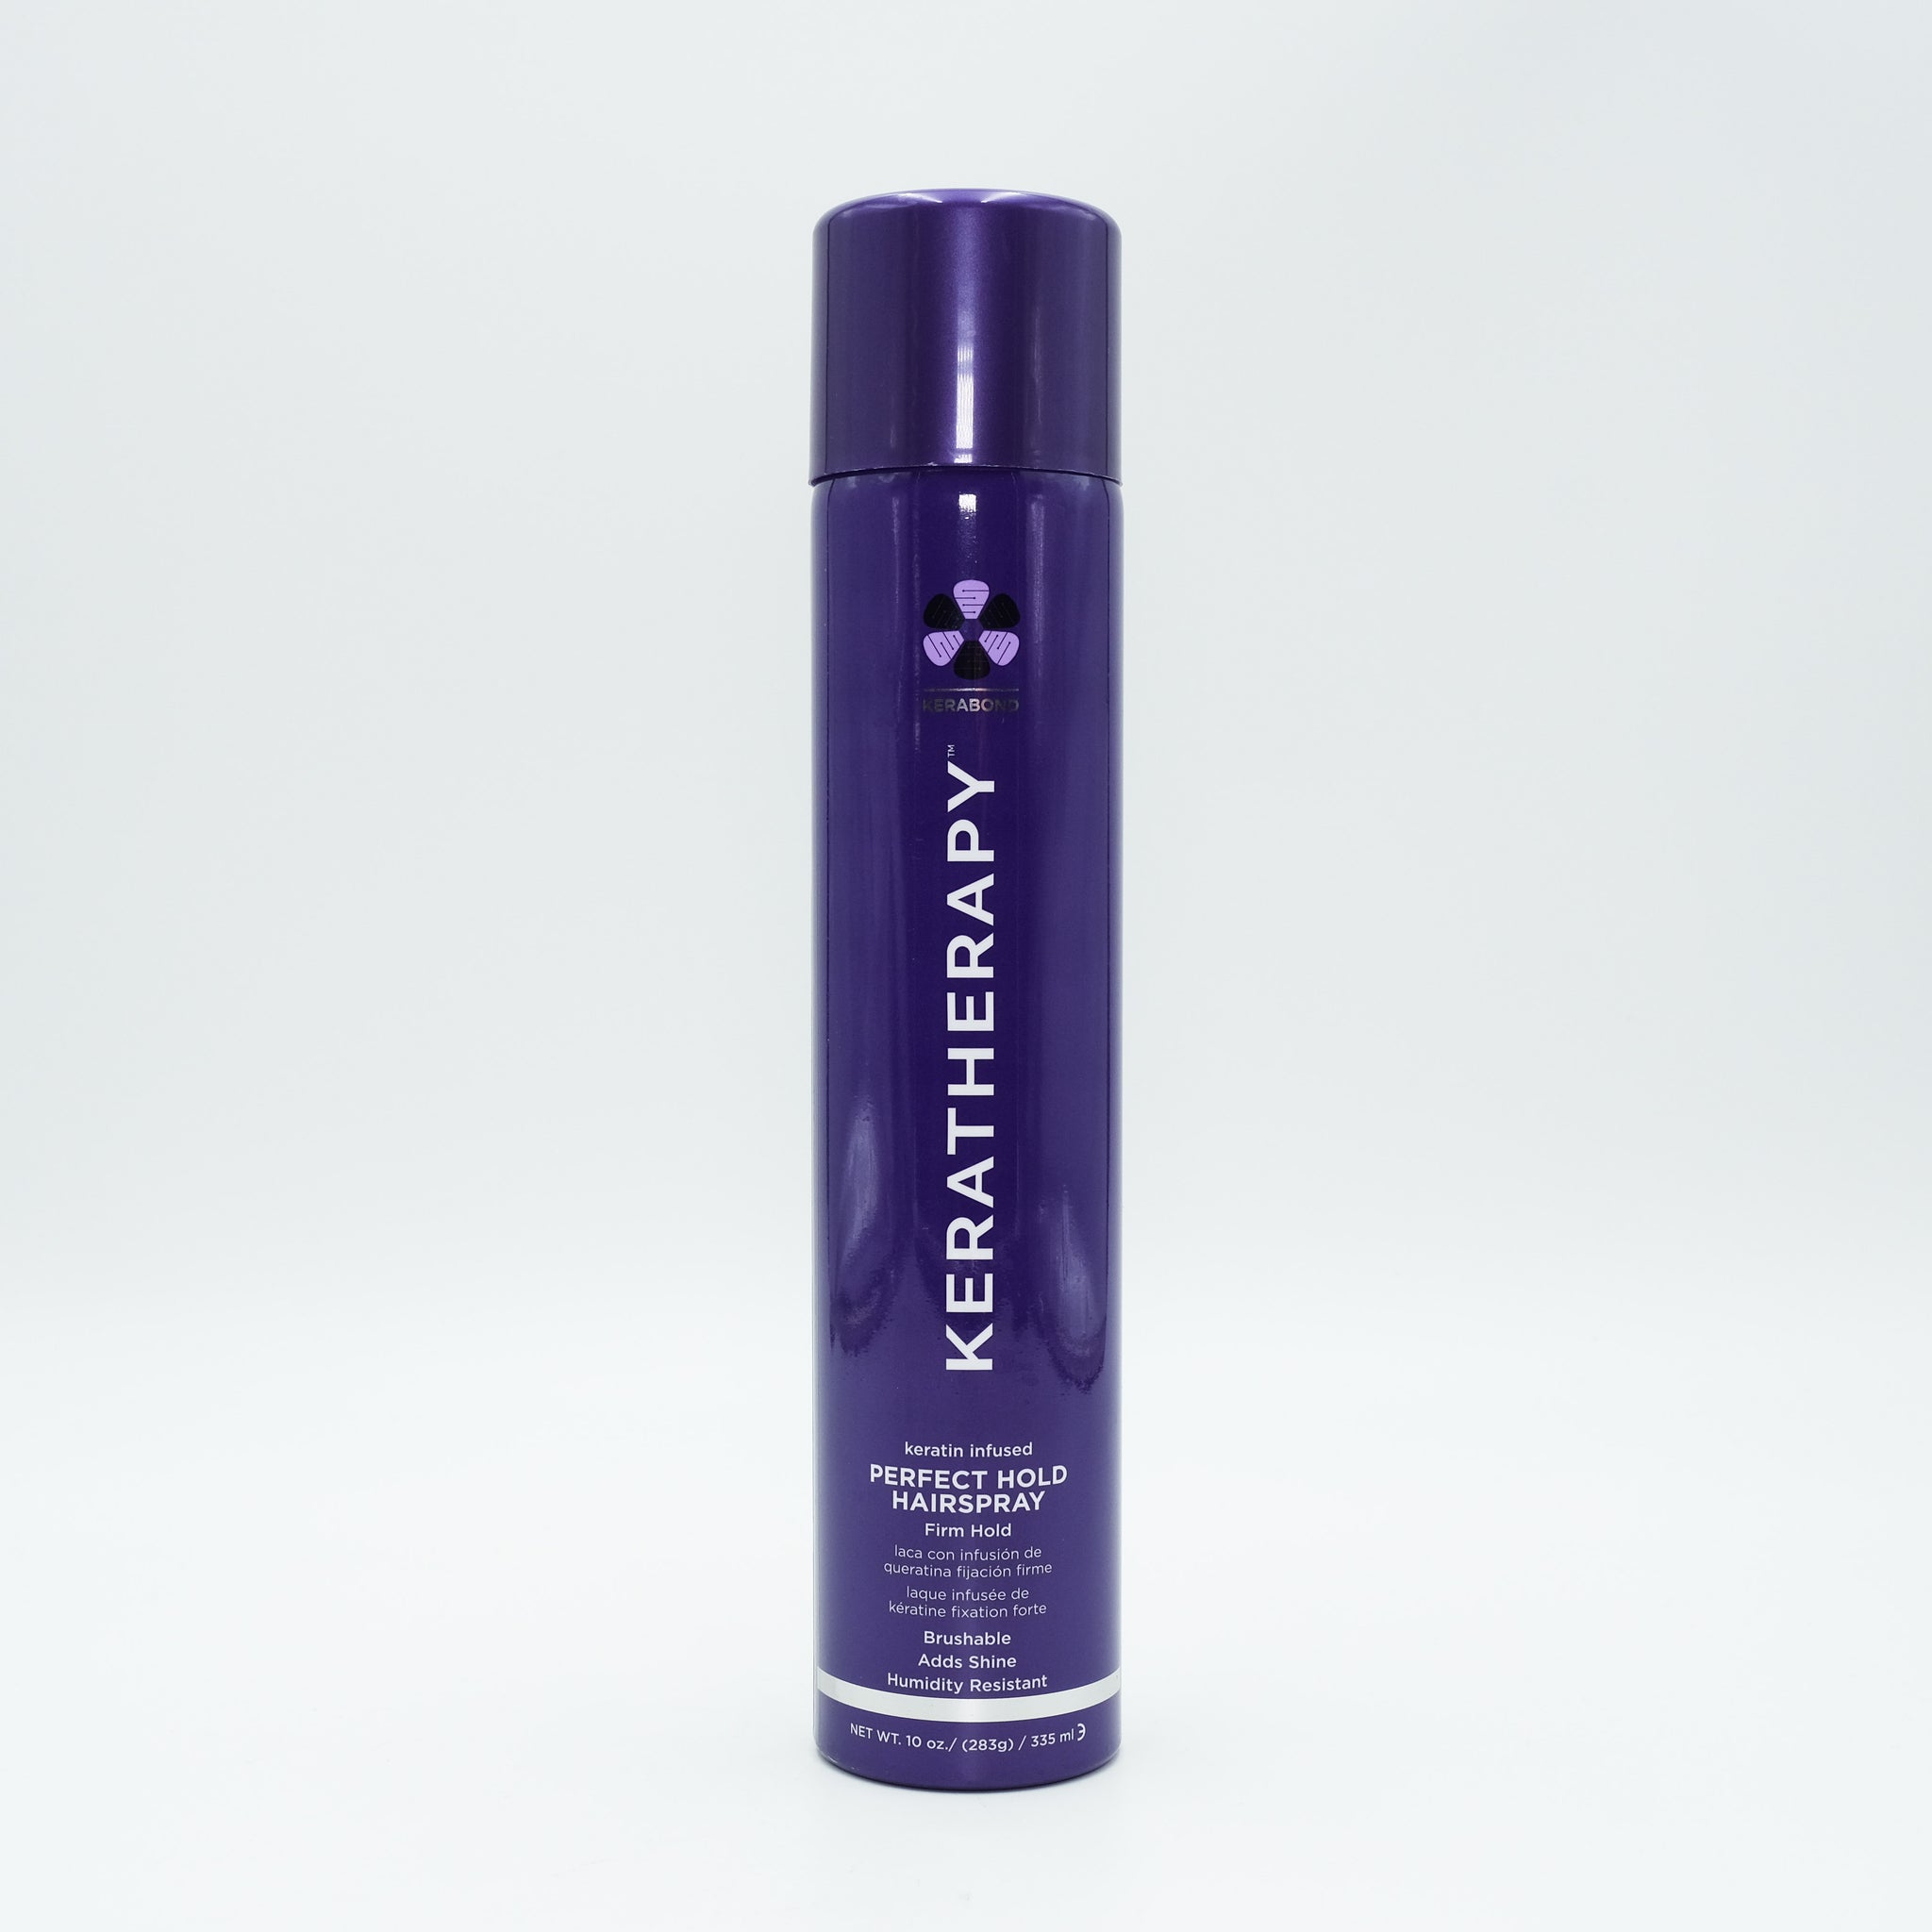 KERATHERAPY Keratin Infused Perfect Hold Hairspray 10 oz (Pack Of 2)